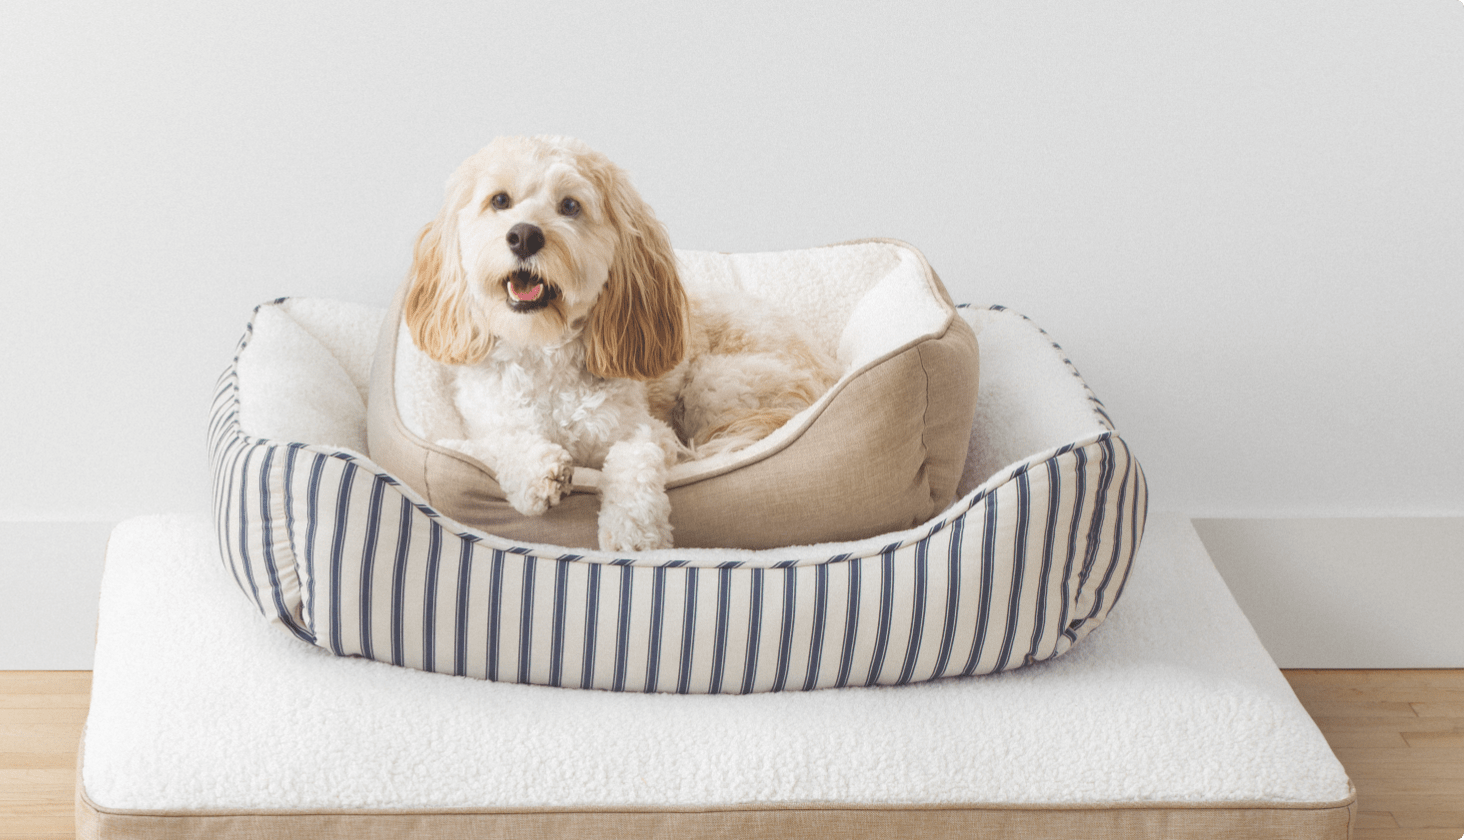 A dog happily sitting in a comfortable and fluffy dog bed.